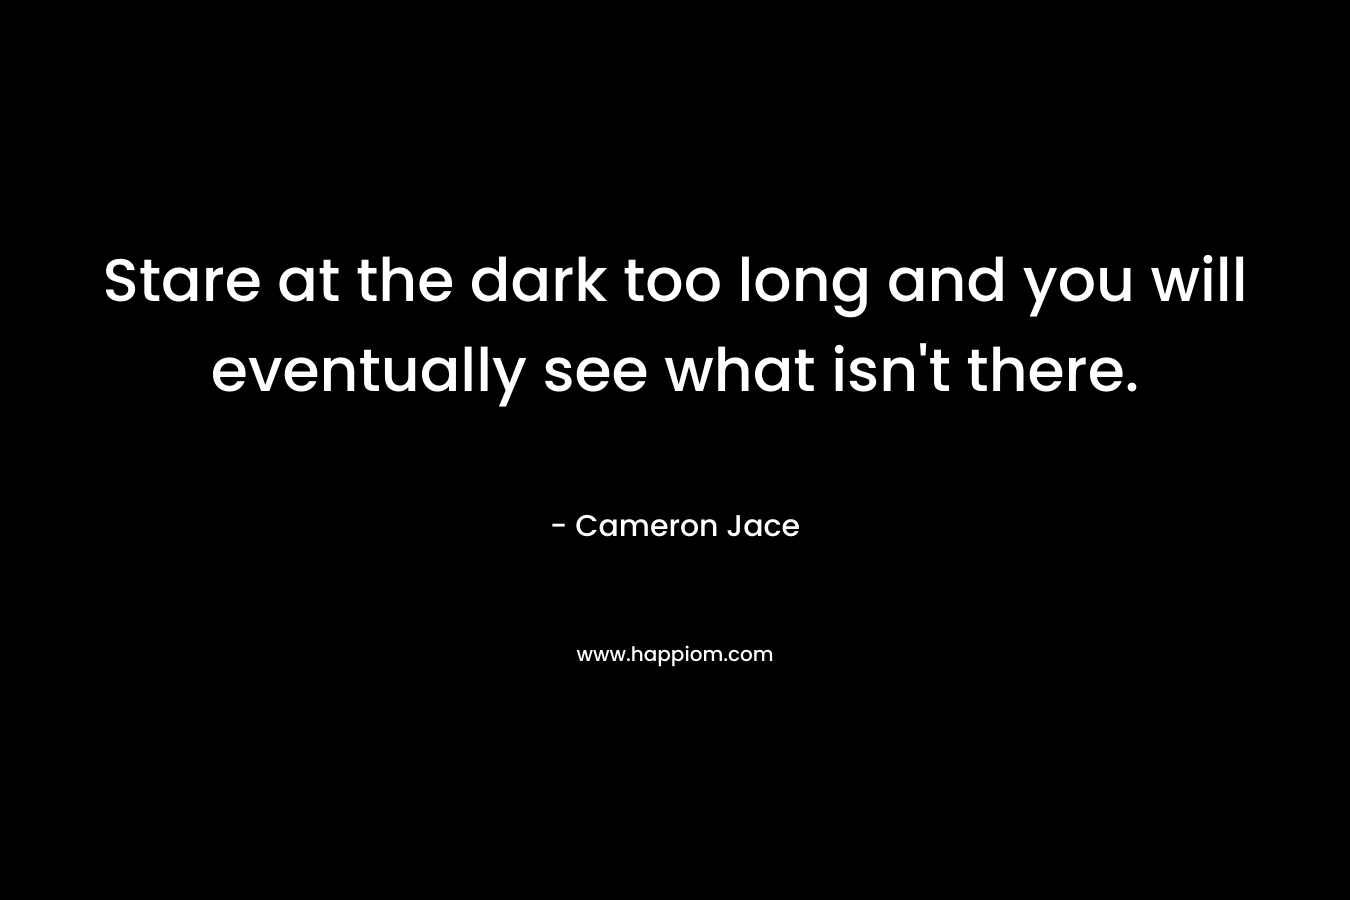 Stare at the dark too long and you will eventually see what isn't there.